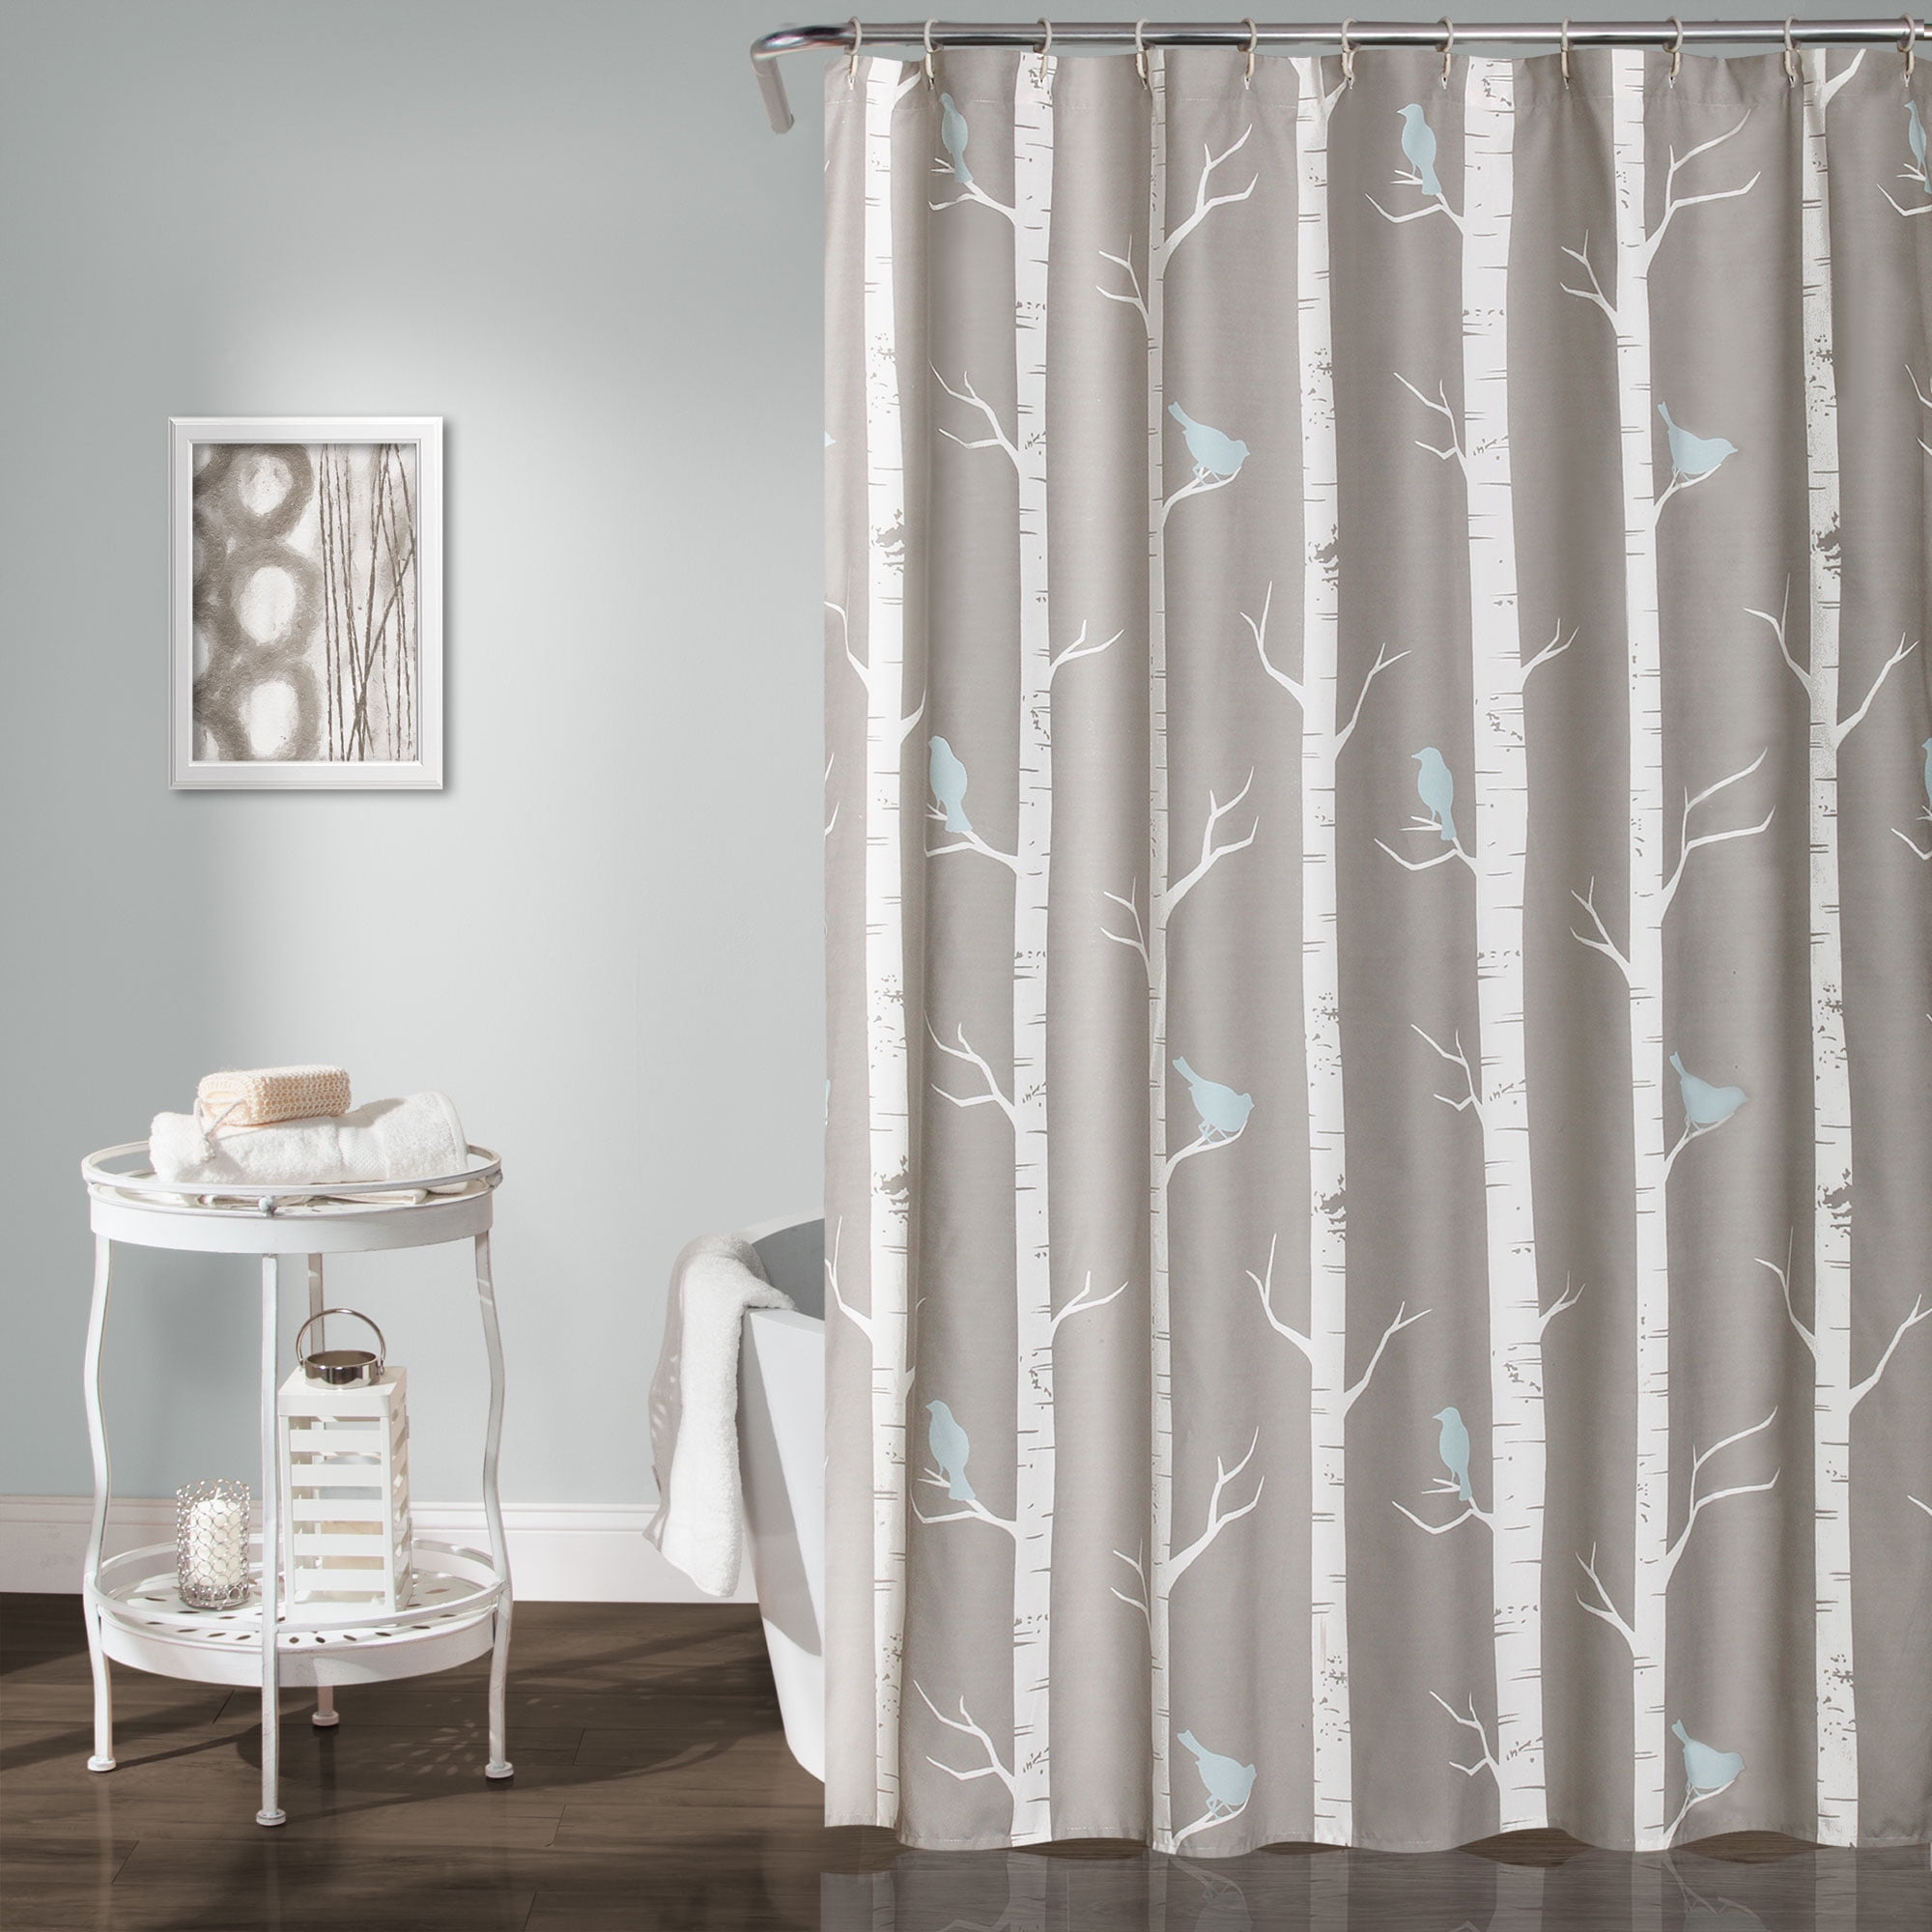 Rowley Shower Curtain-Floral Animal Bird Print Design 72" x 72" Blue and Gray 